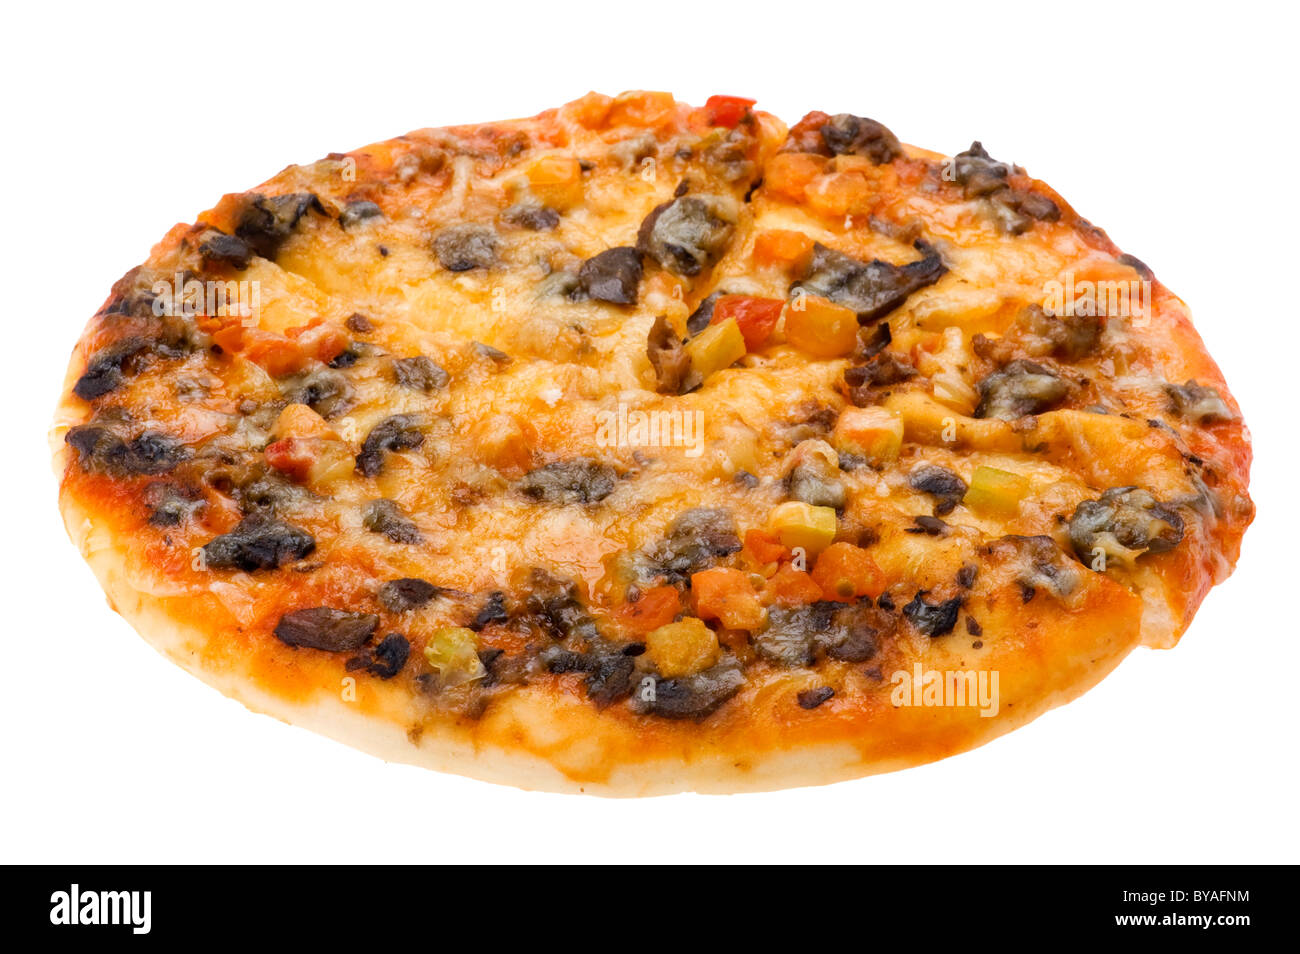 object on white - food sliced pizza Stock Photo